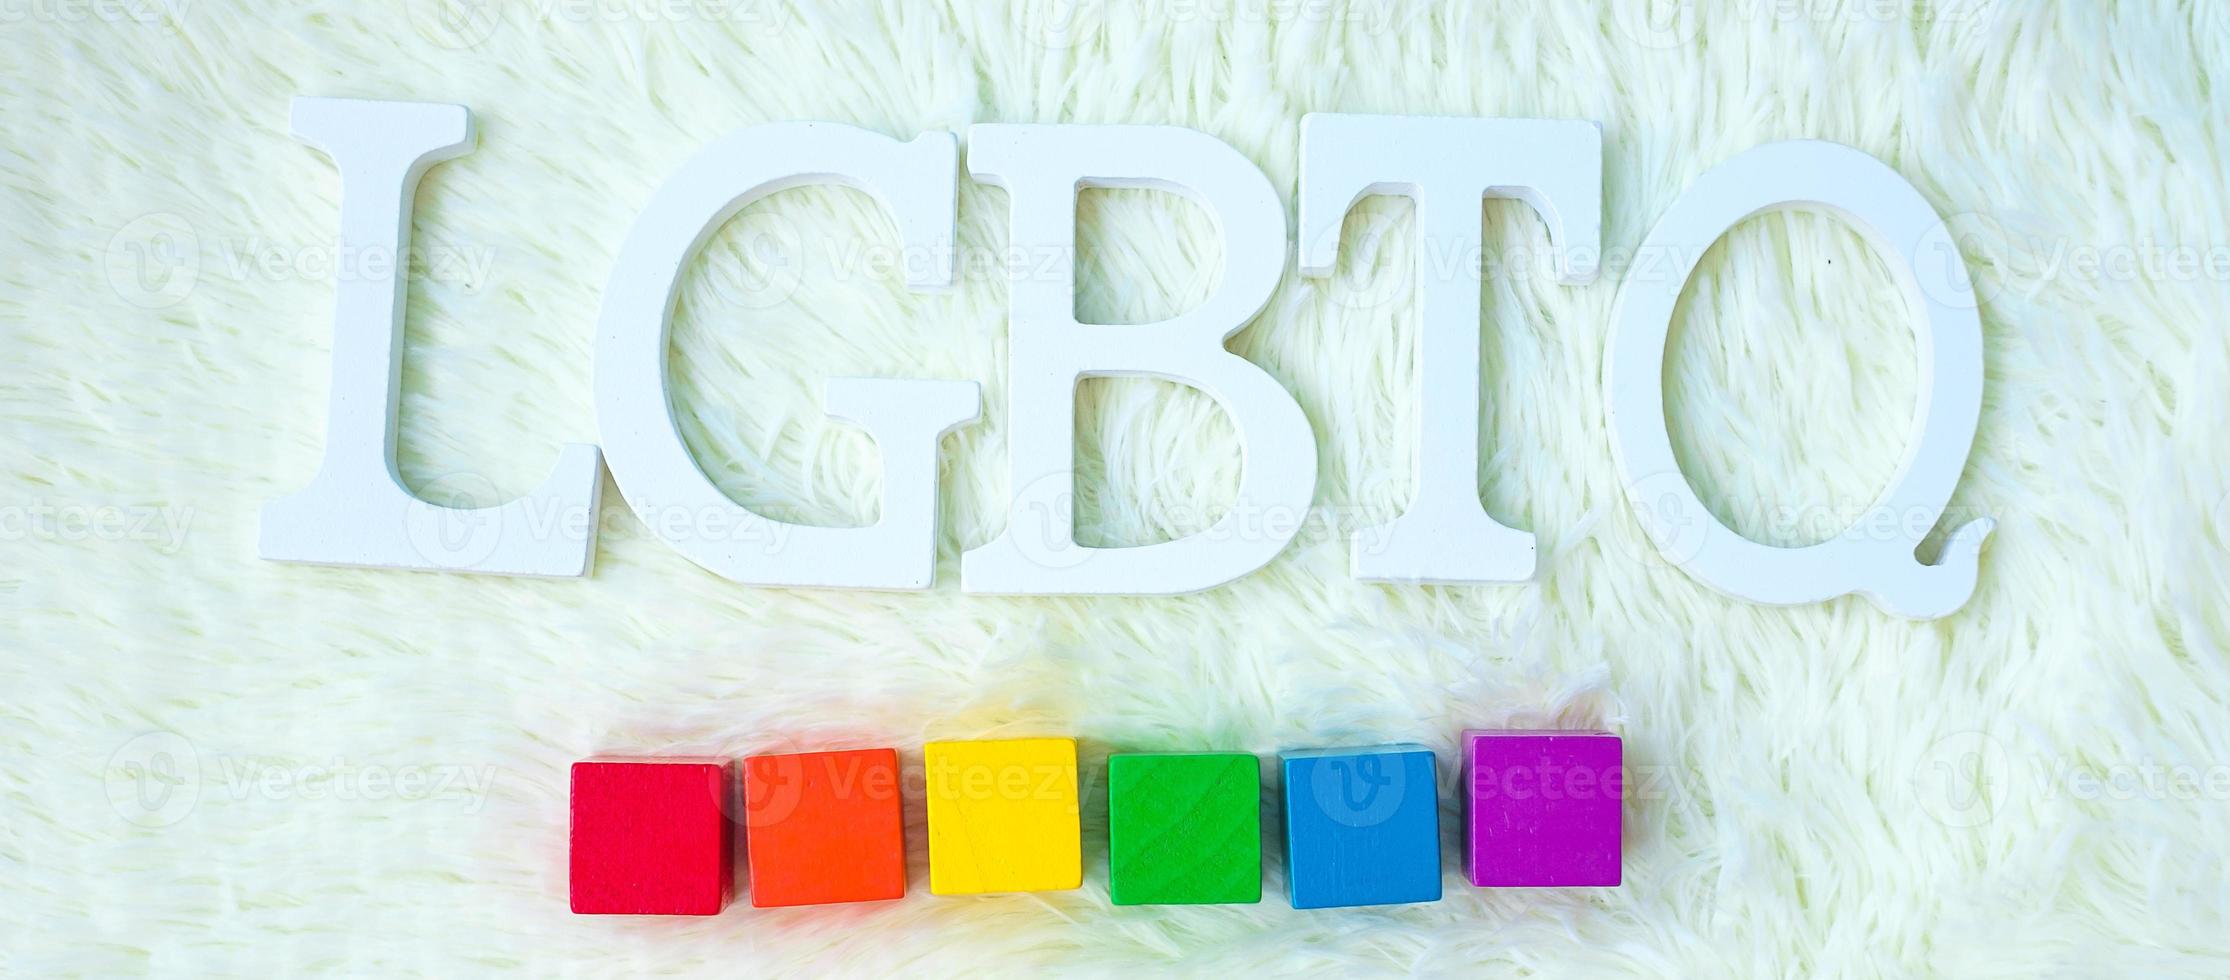 LGBTQ Rainbow block on white background. Support Lesbian, Gay, Bisexual, Transgender and Queer community and Pride month concept photo